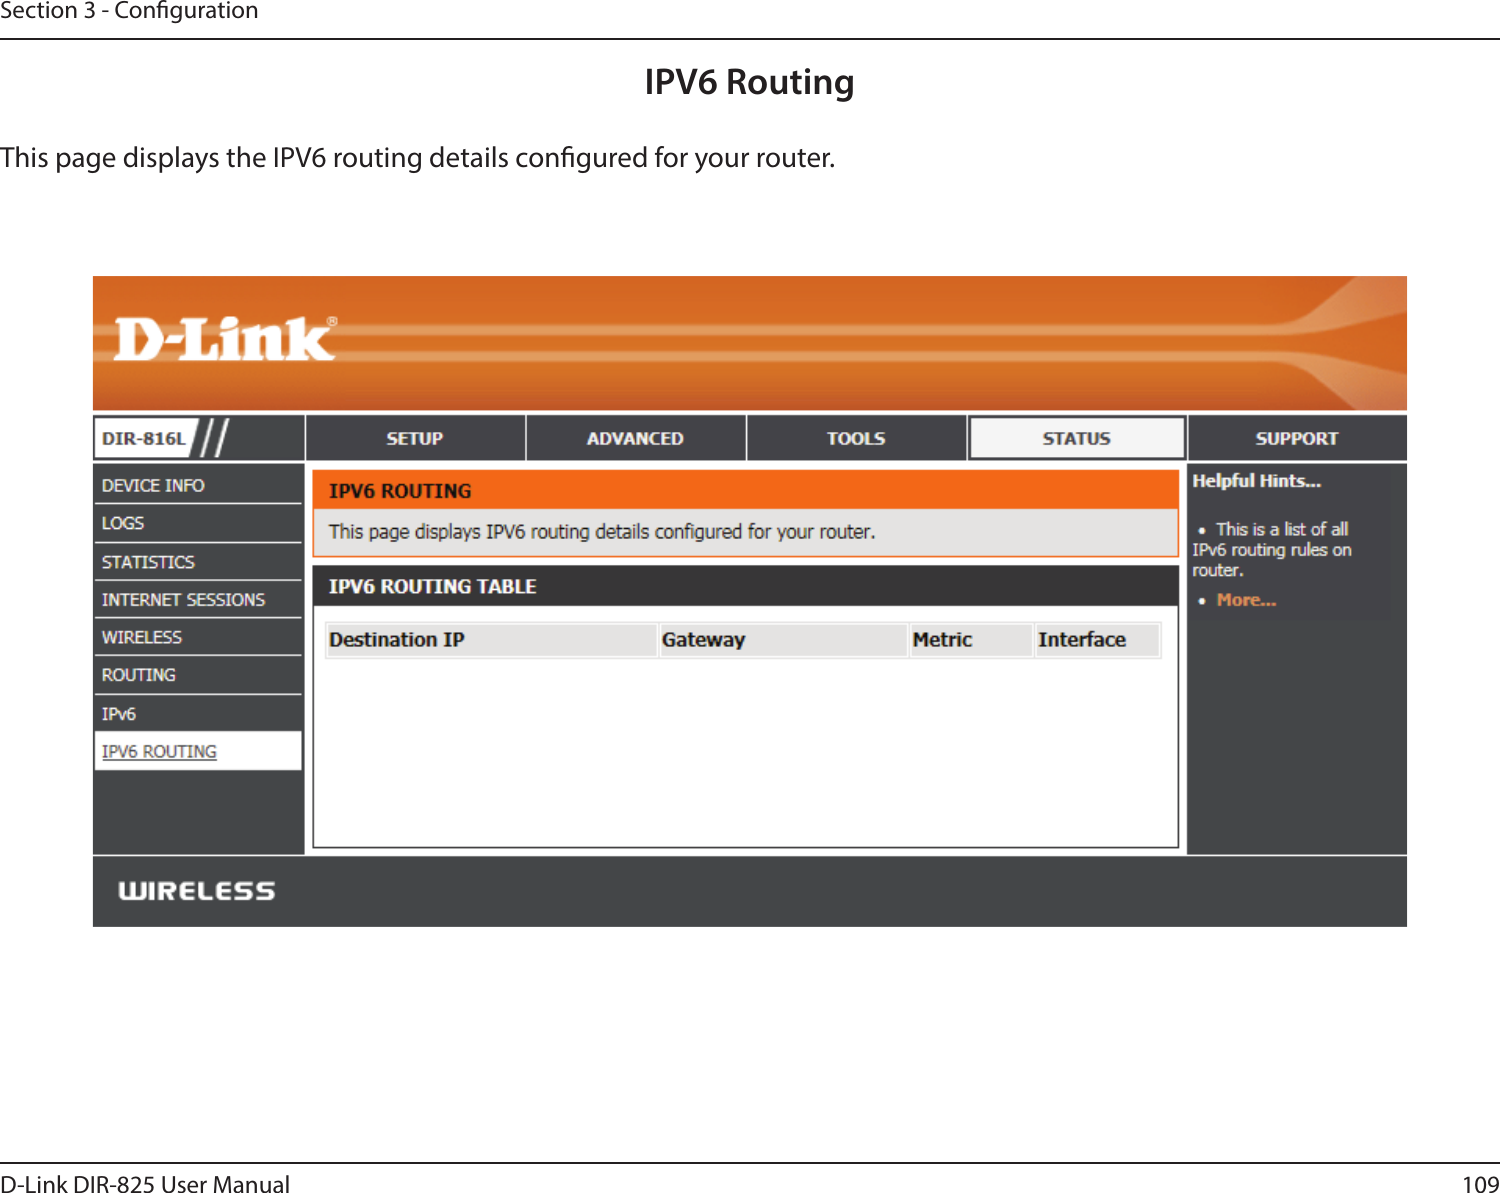 109D-Link DIR-825 User ManualSection 3 - CongurationIPV6 RoutingThis page displays the IPV6 routing details congured for your router. 